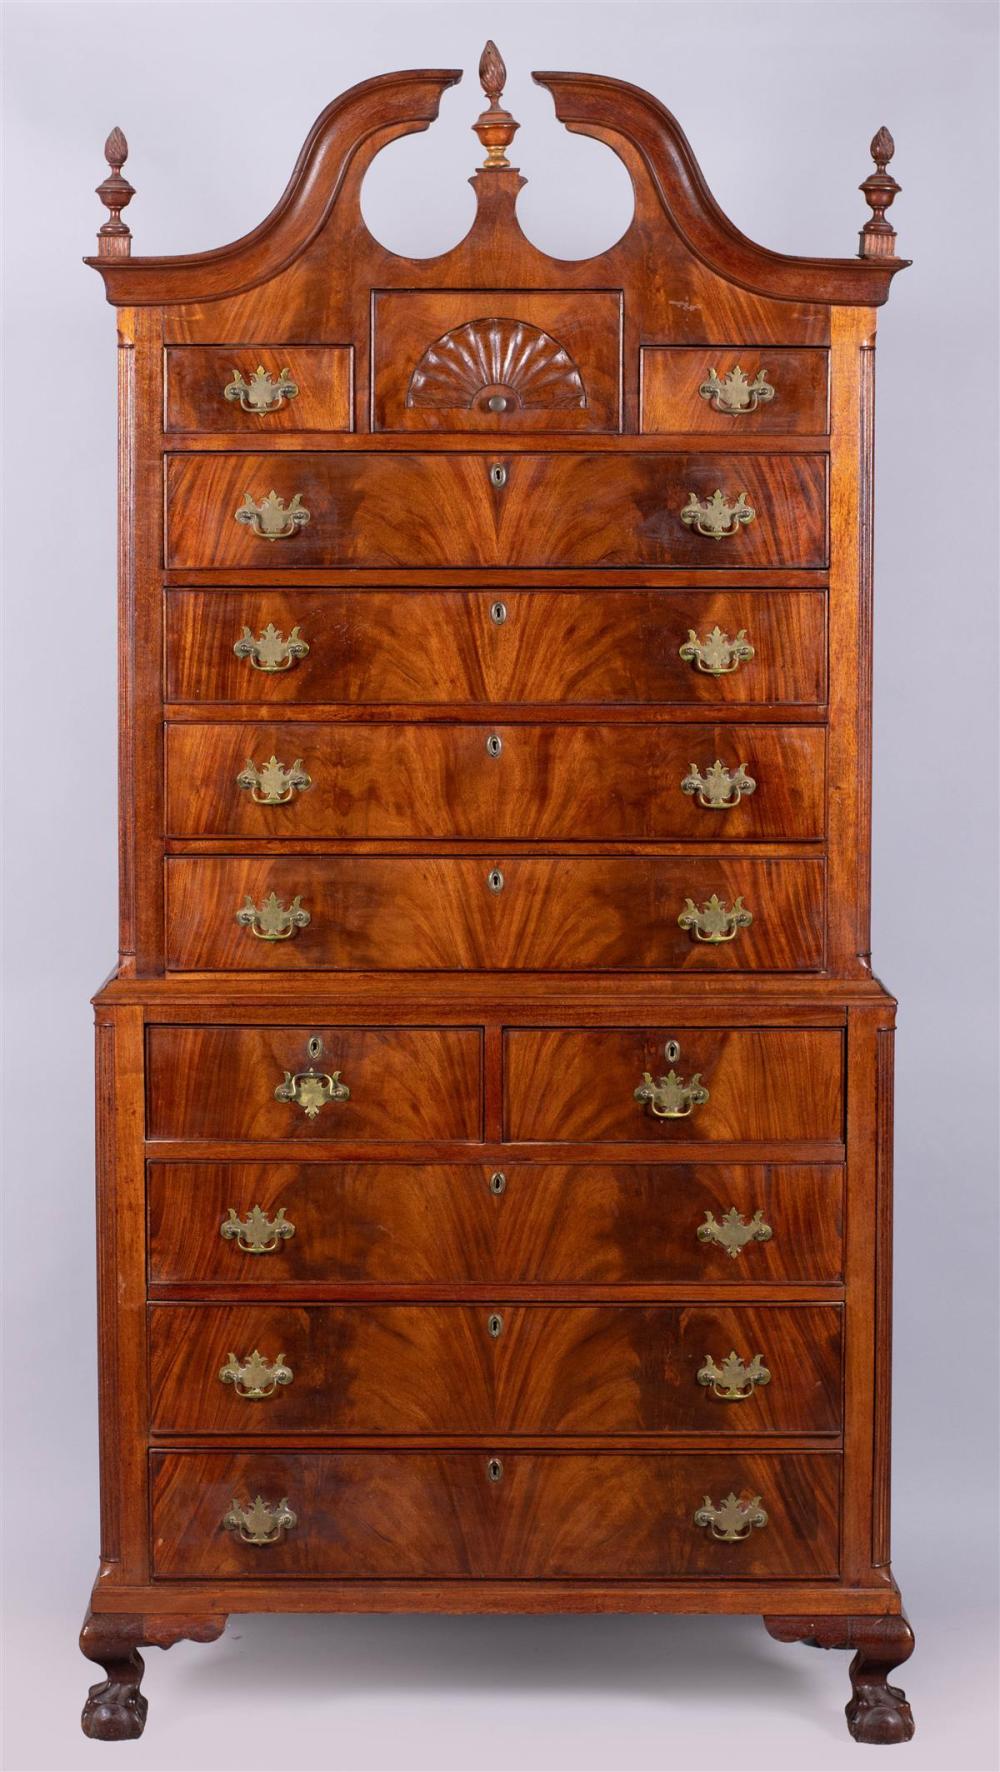 CHIPPENDALE STYLE MAHOGANY HIGHBOYCHIPPENDALE